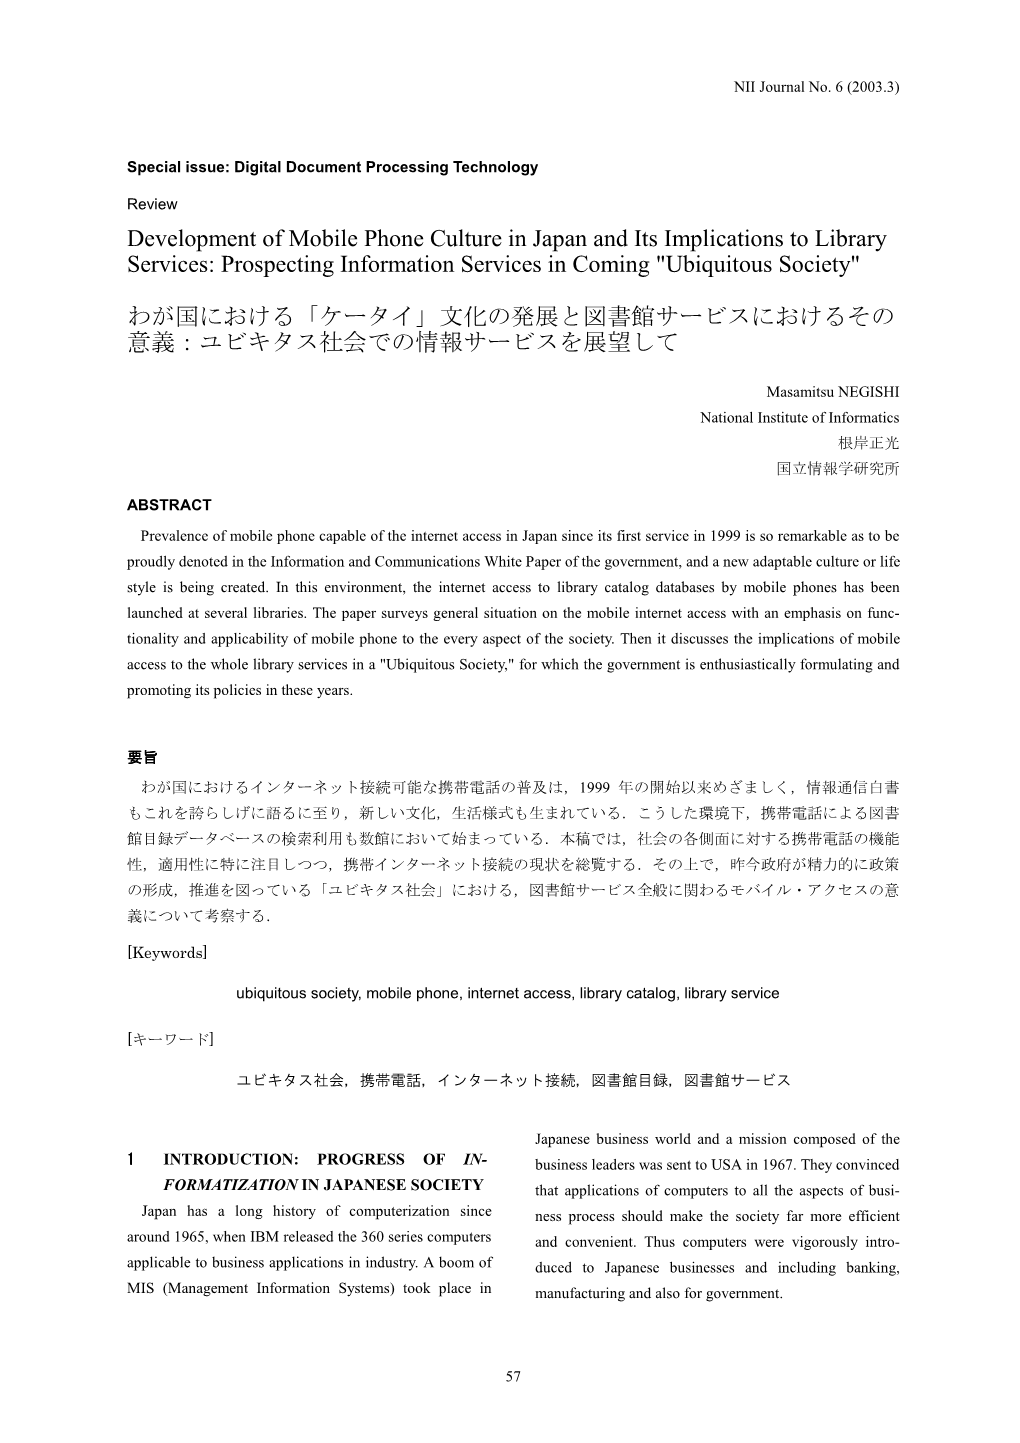 Development of Mobile Phone Culture in Japan and Its Implications to Library Services: Prospecting Information Services in Coming "Ubiquitous Society"